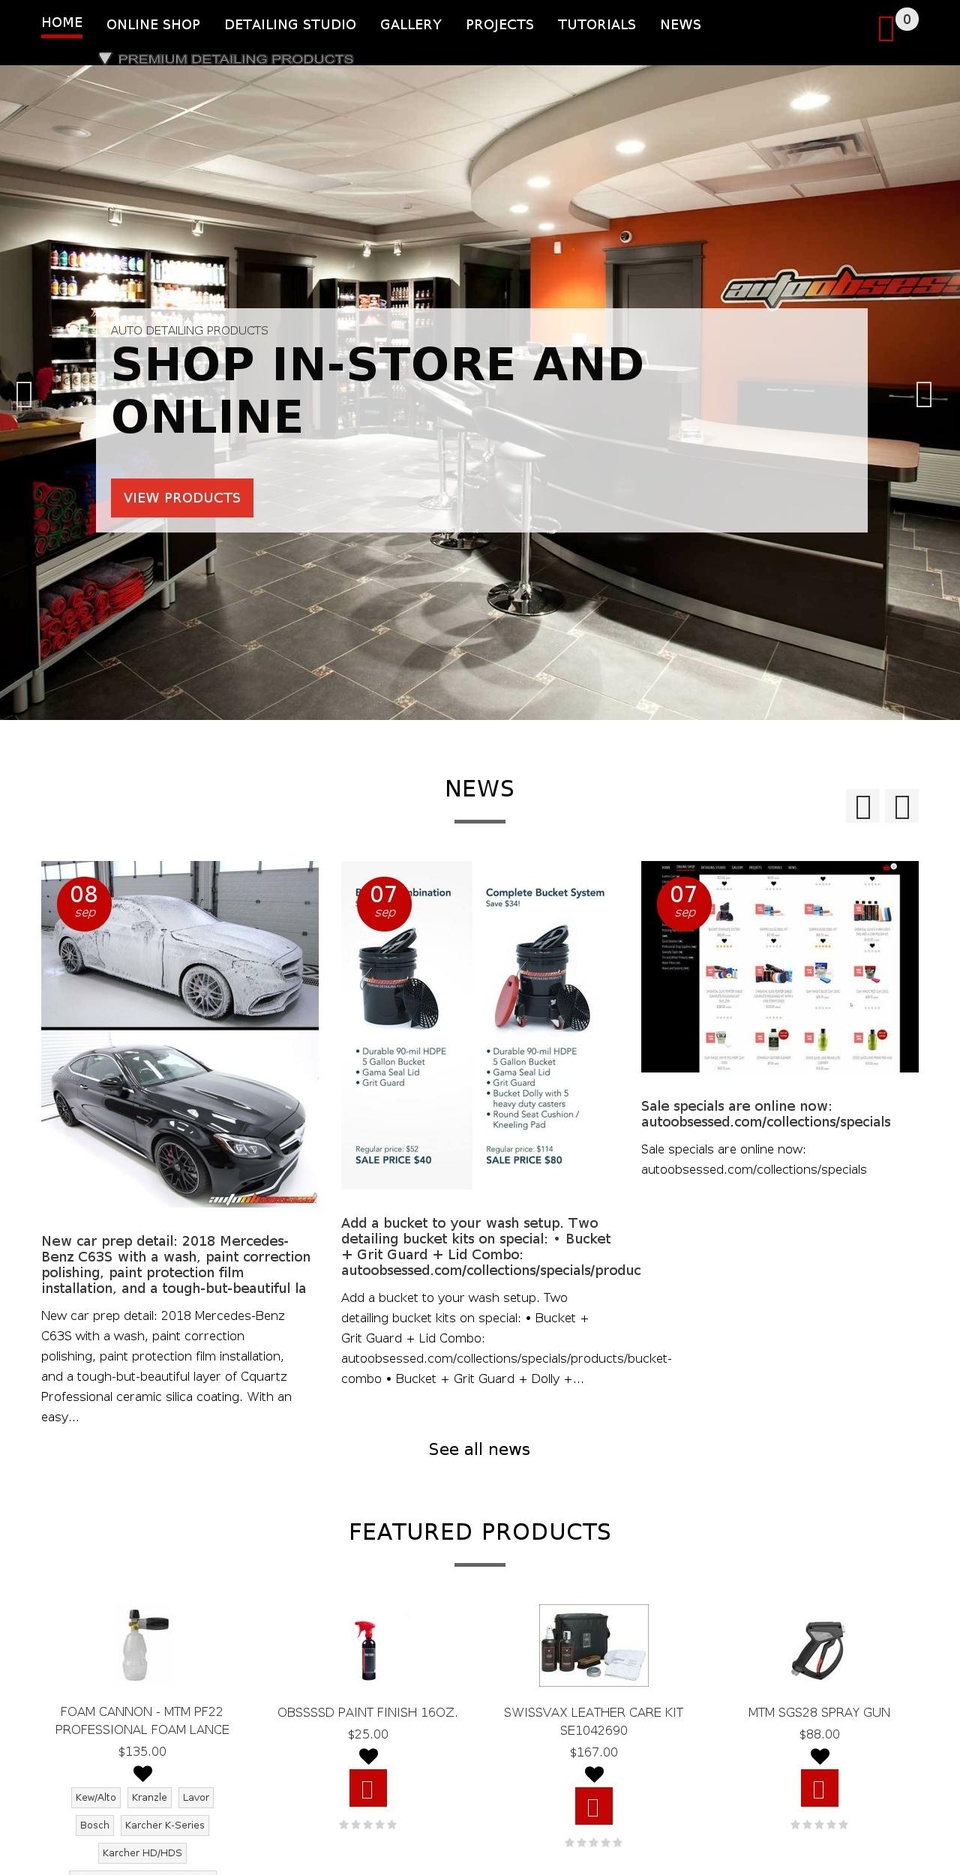 autosobsessed.ca shopify website screenshot